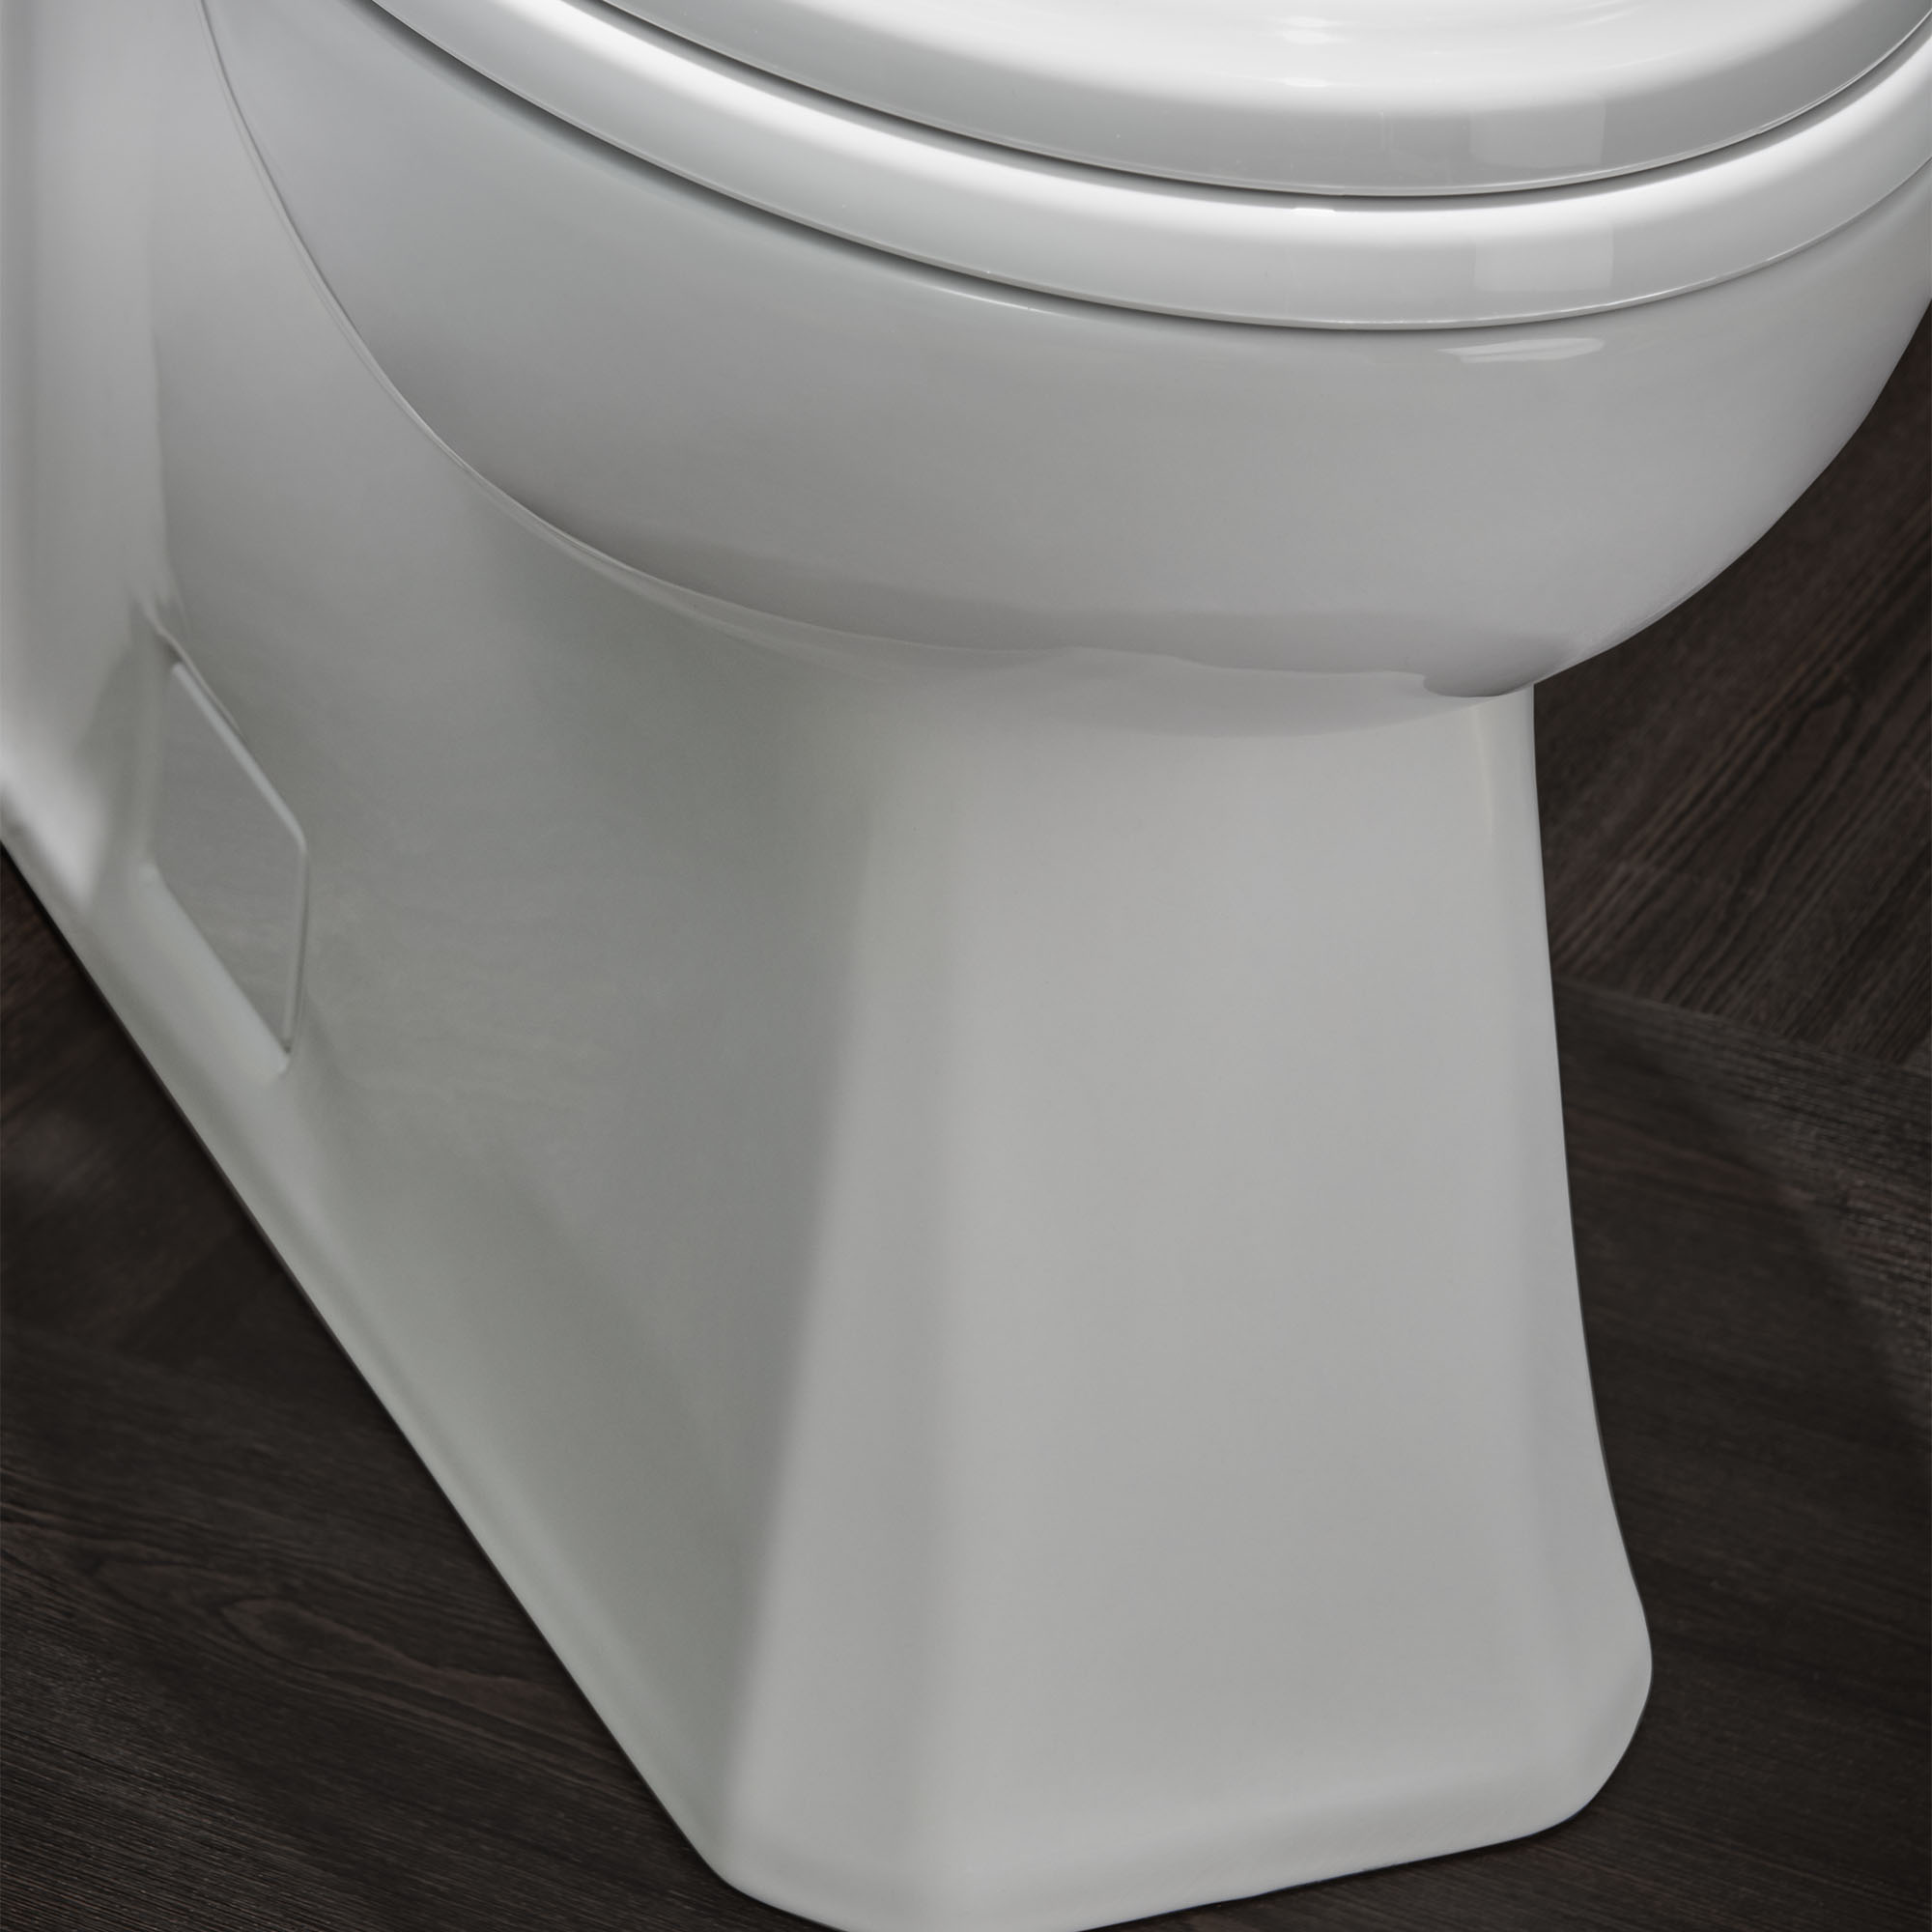 Belshire® One-Piece Chair-Height Elongated Toilet with Seat